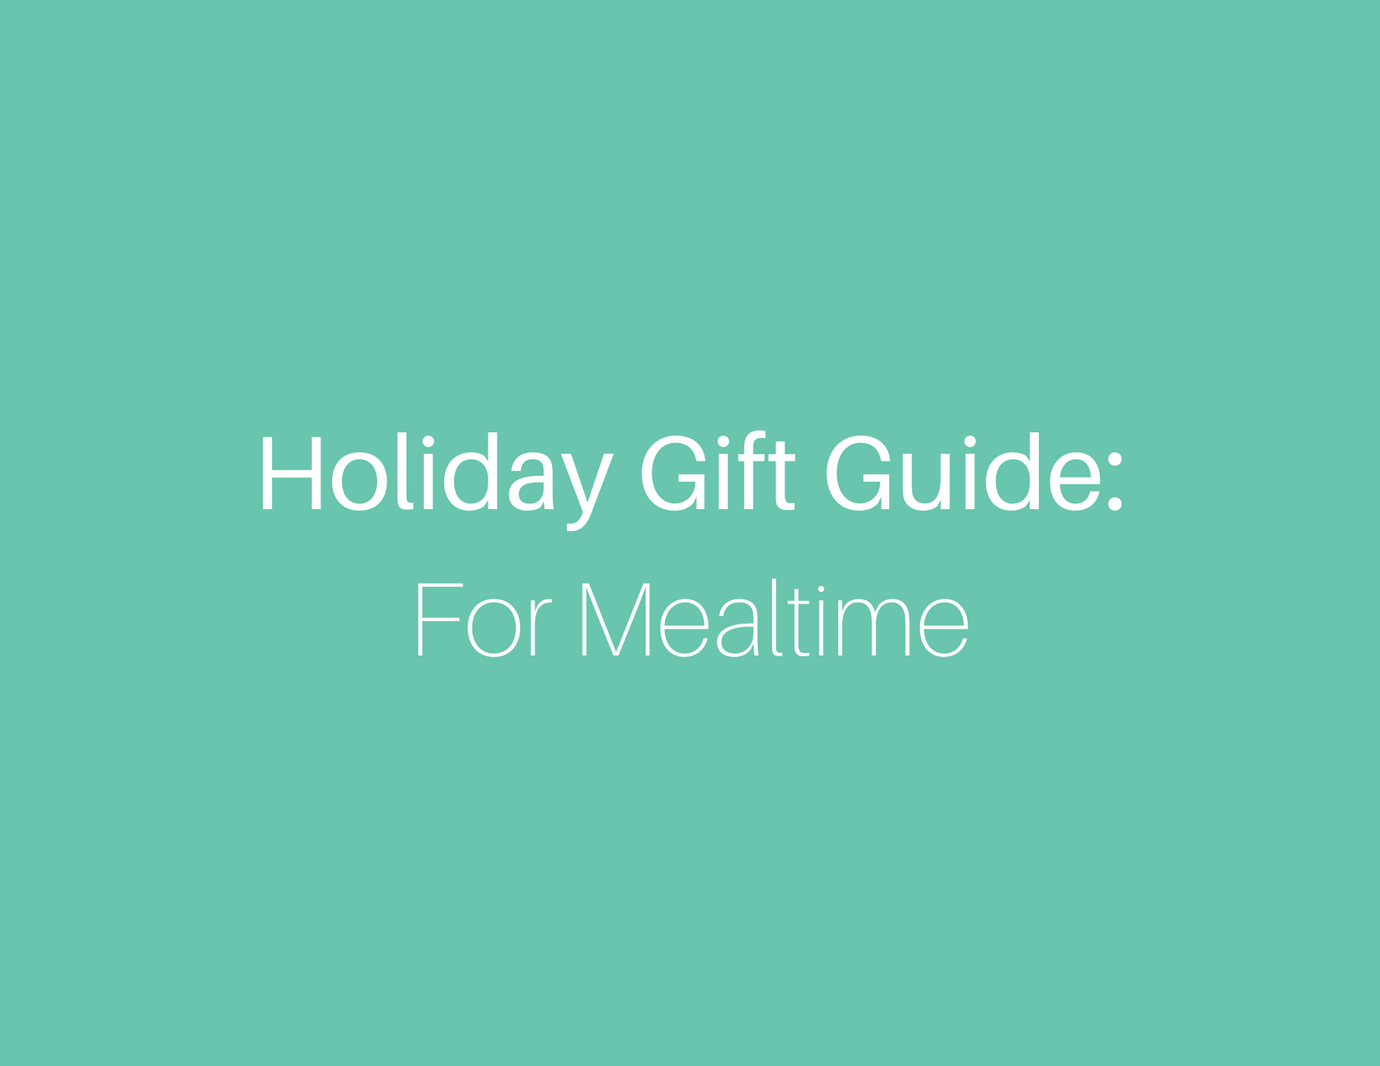 Holiday Gift Guide: For Mealtime